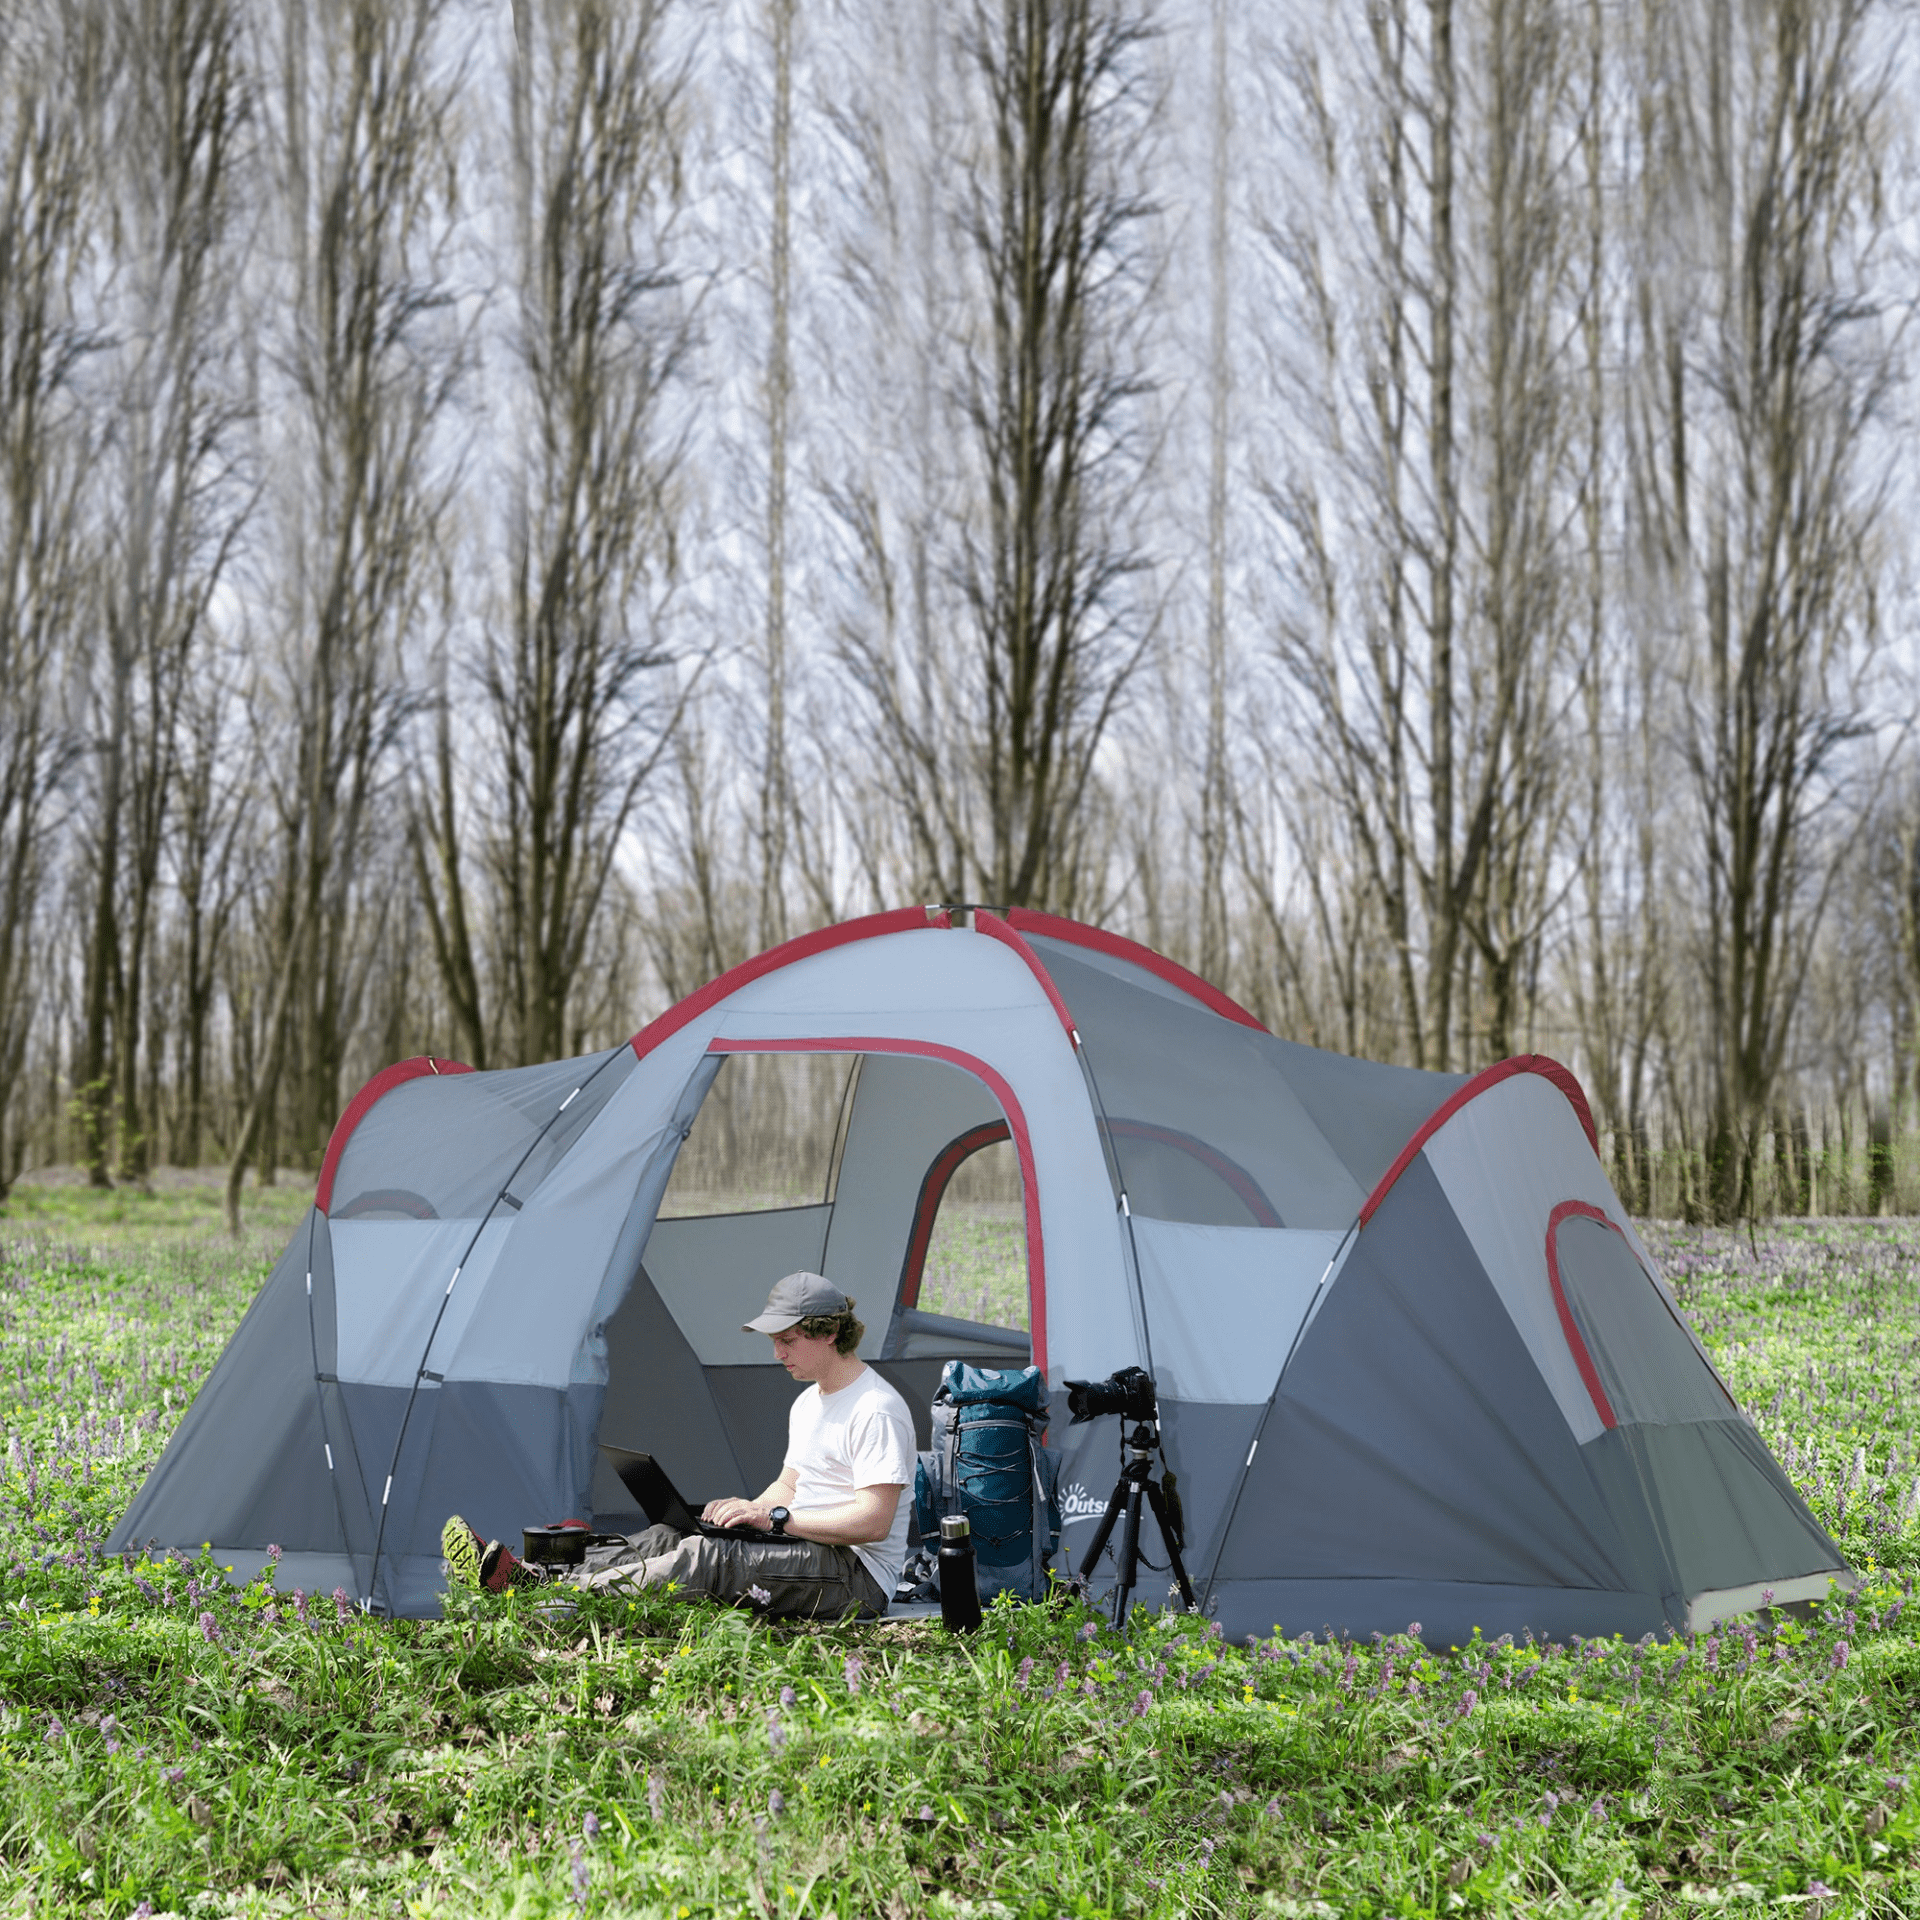 Outsunny 5-6 Man Dome Camping Tent 6 Man Tent Cosy Camping Co.   